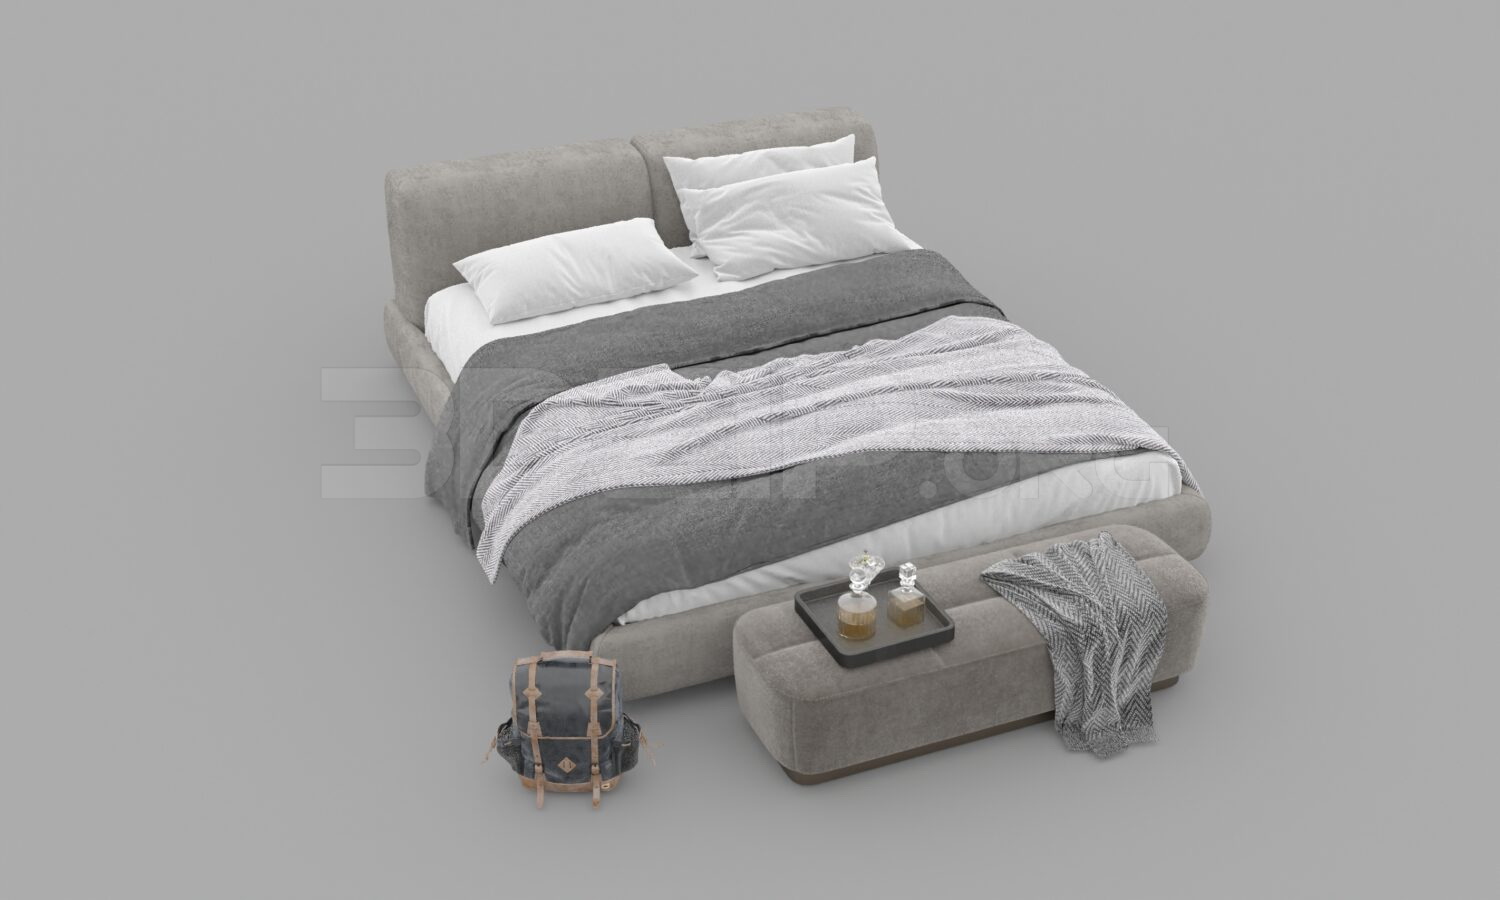 514. Download Free Bed Model By Viet Long Lee